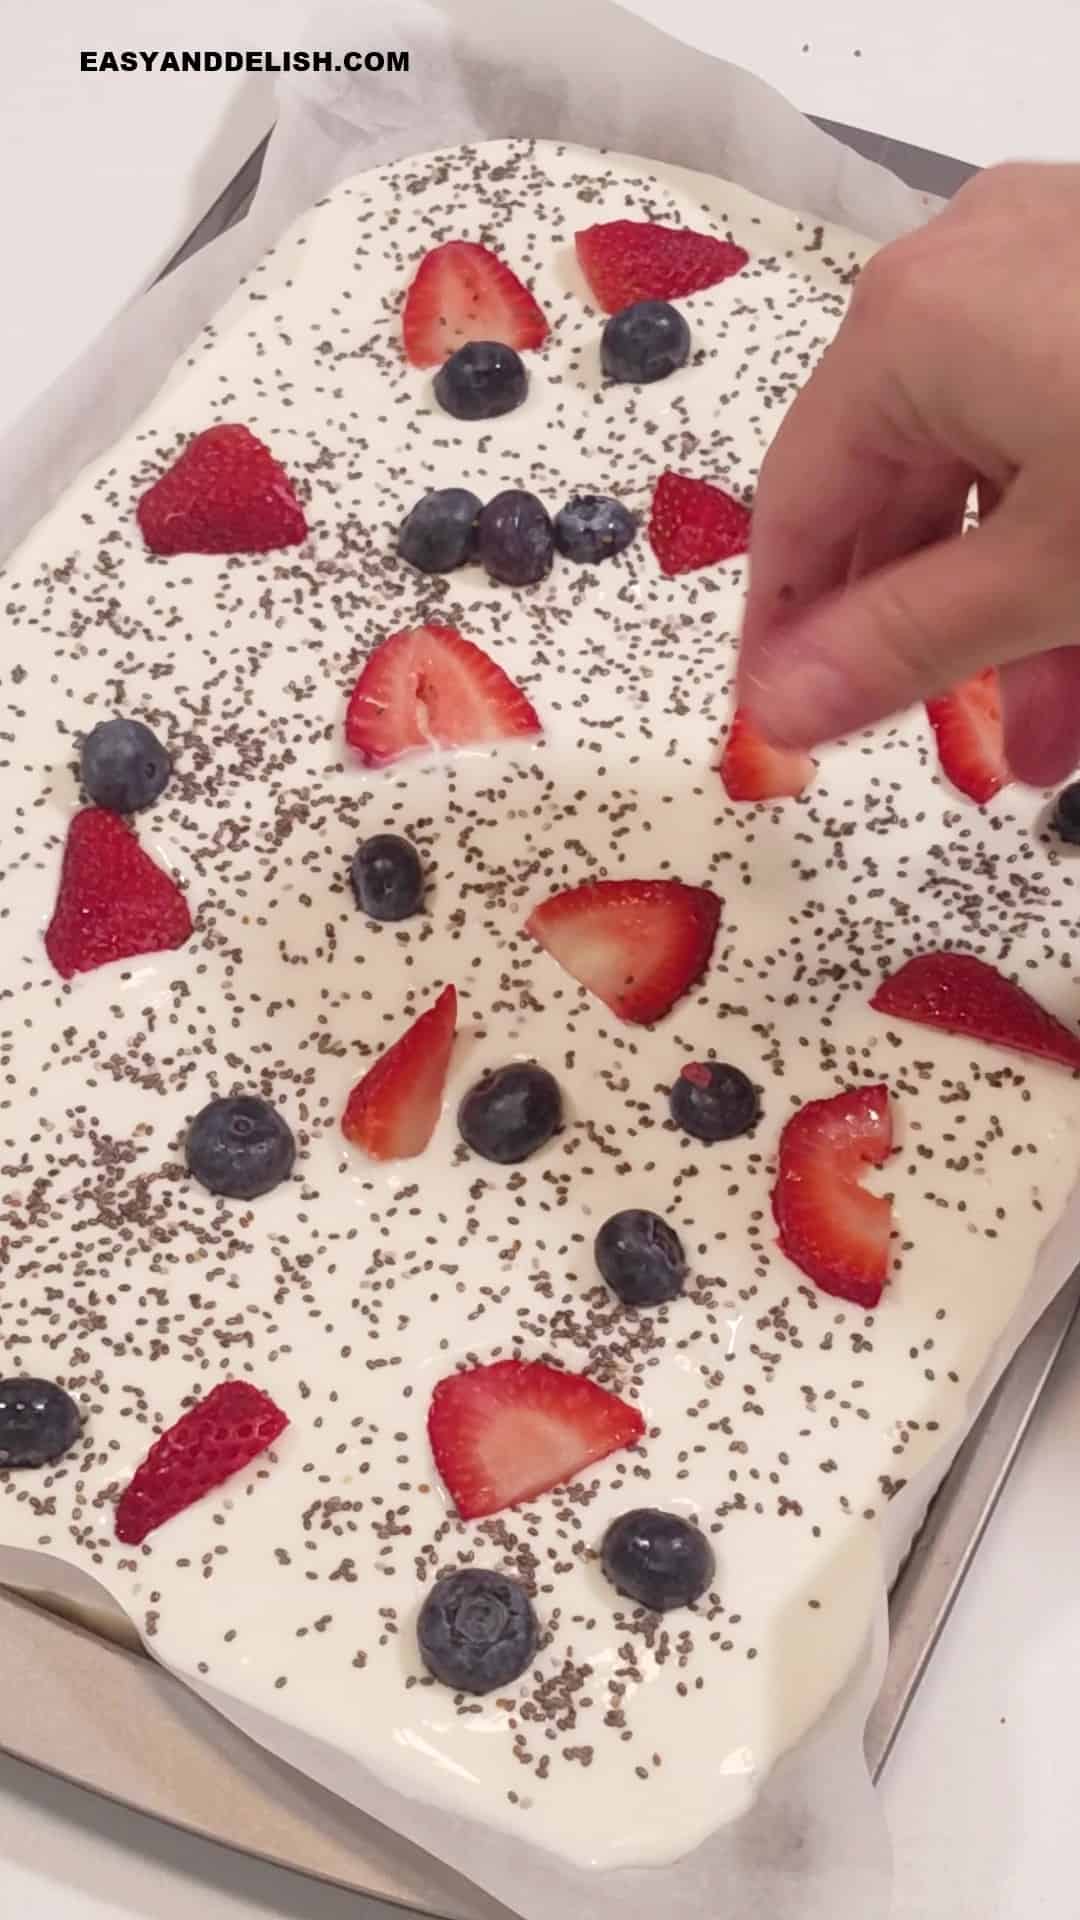 topping yogurt mixture with chia seeds and berries. 